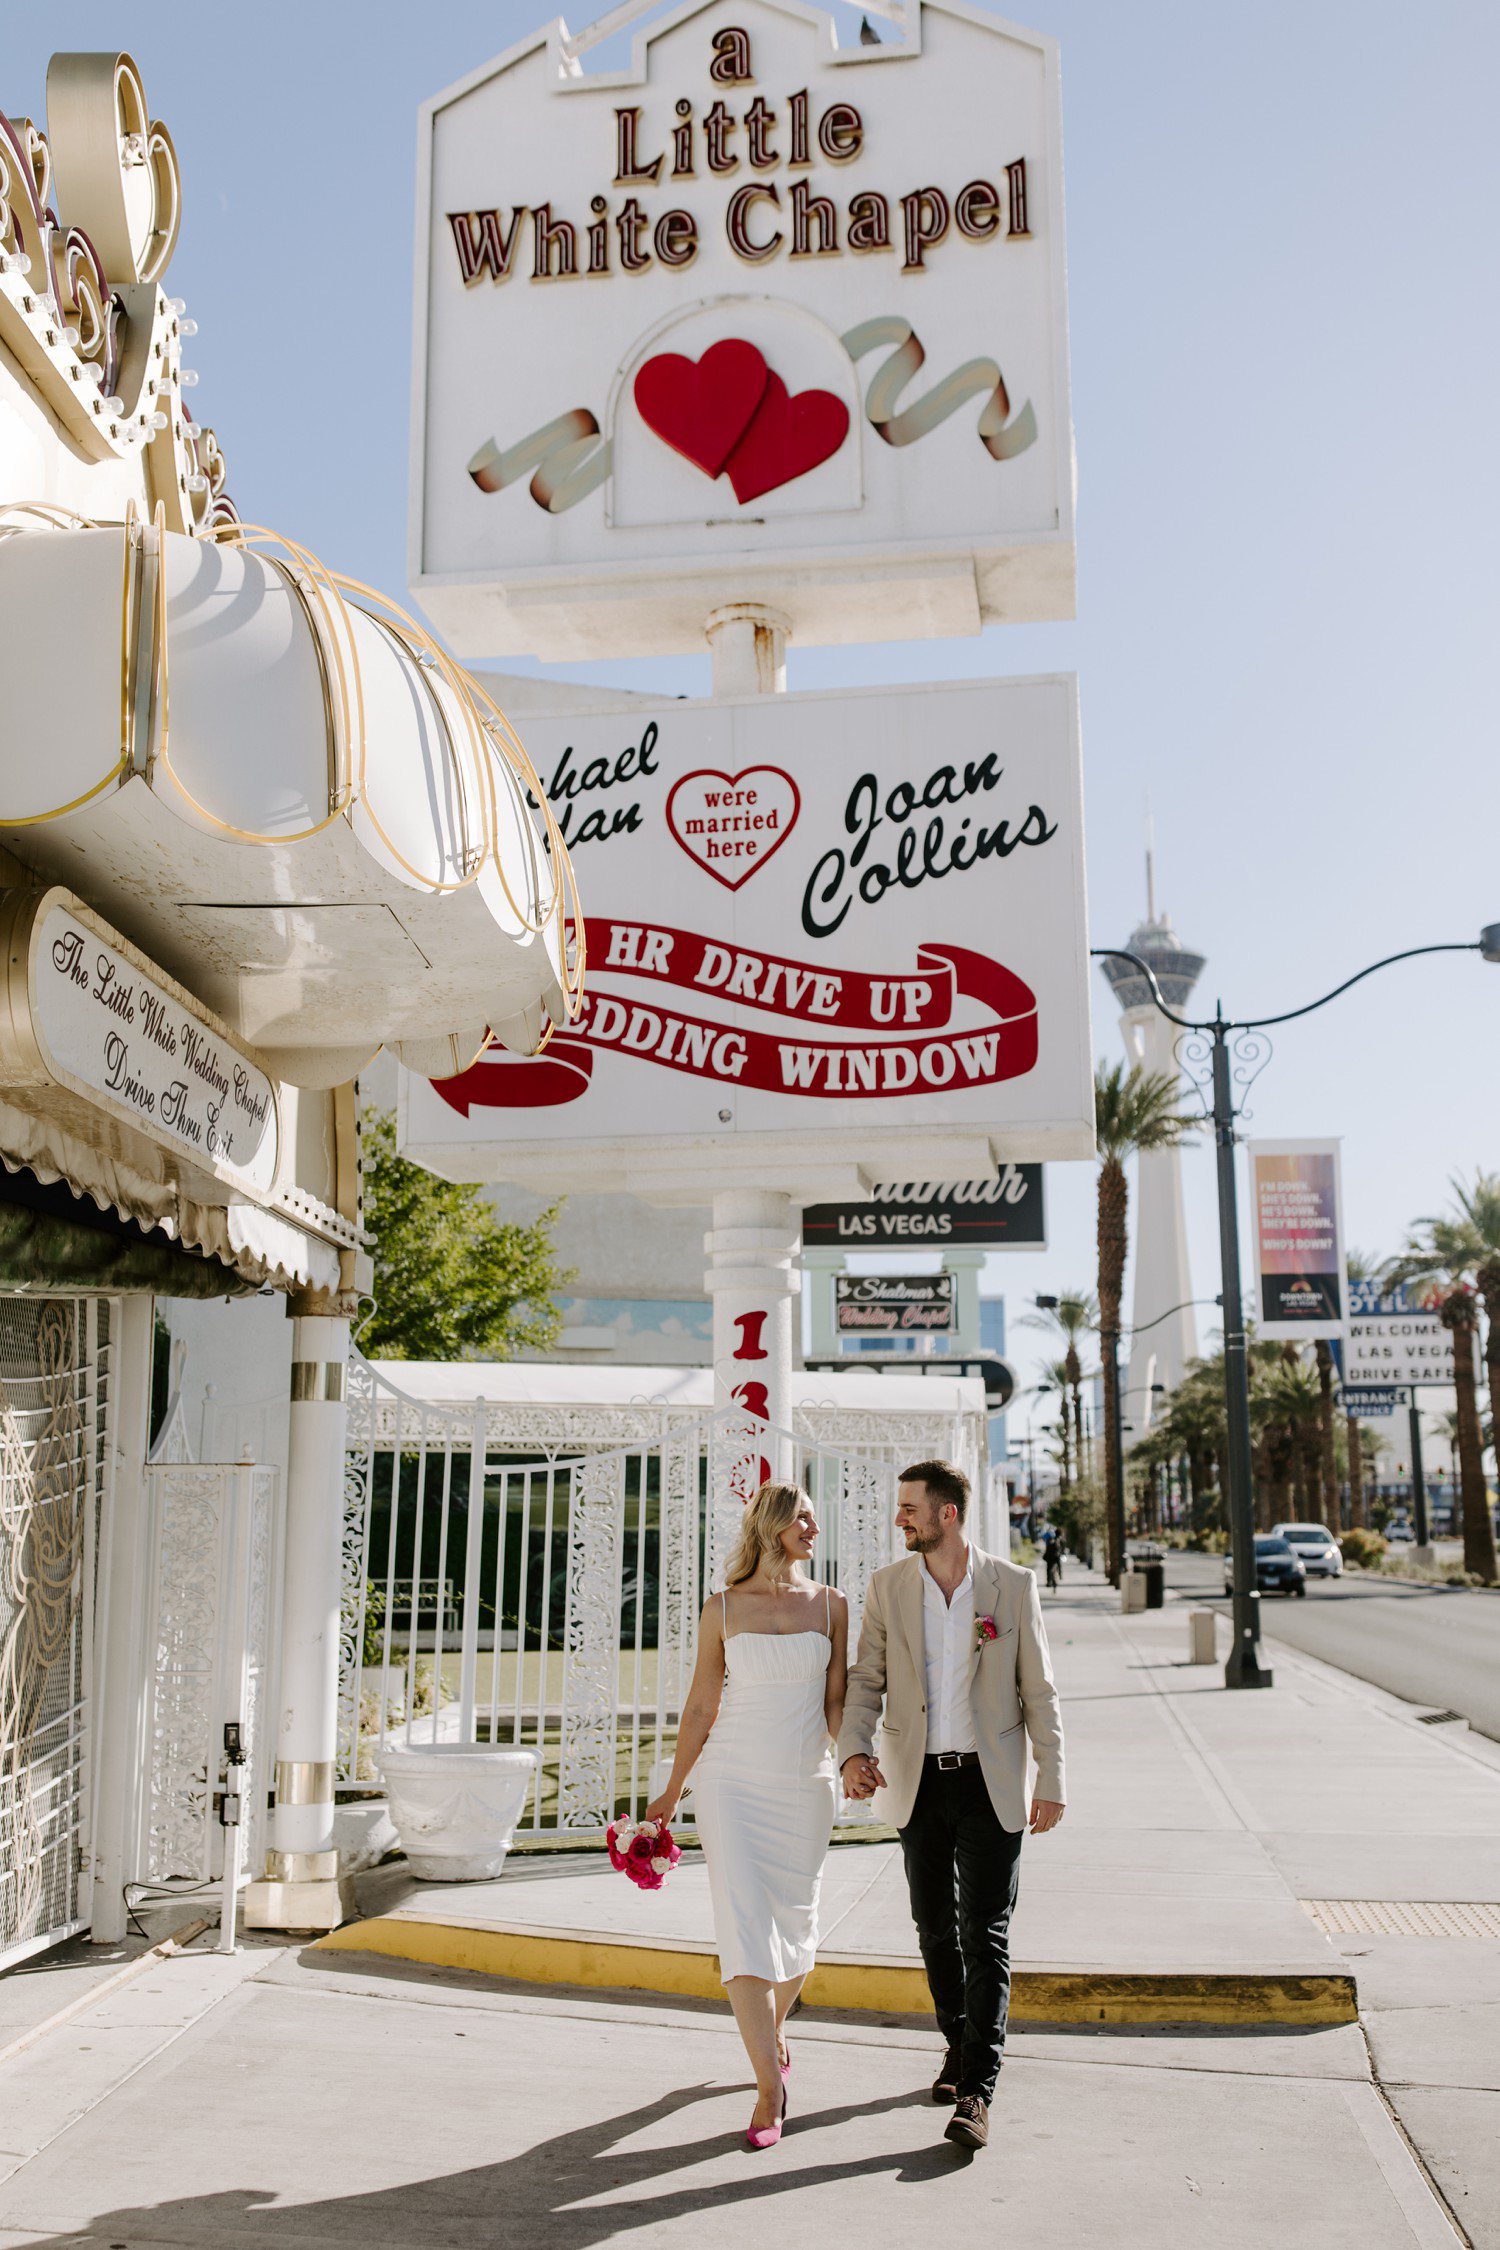 Wedding photos outside of A Little White Chapel sign.